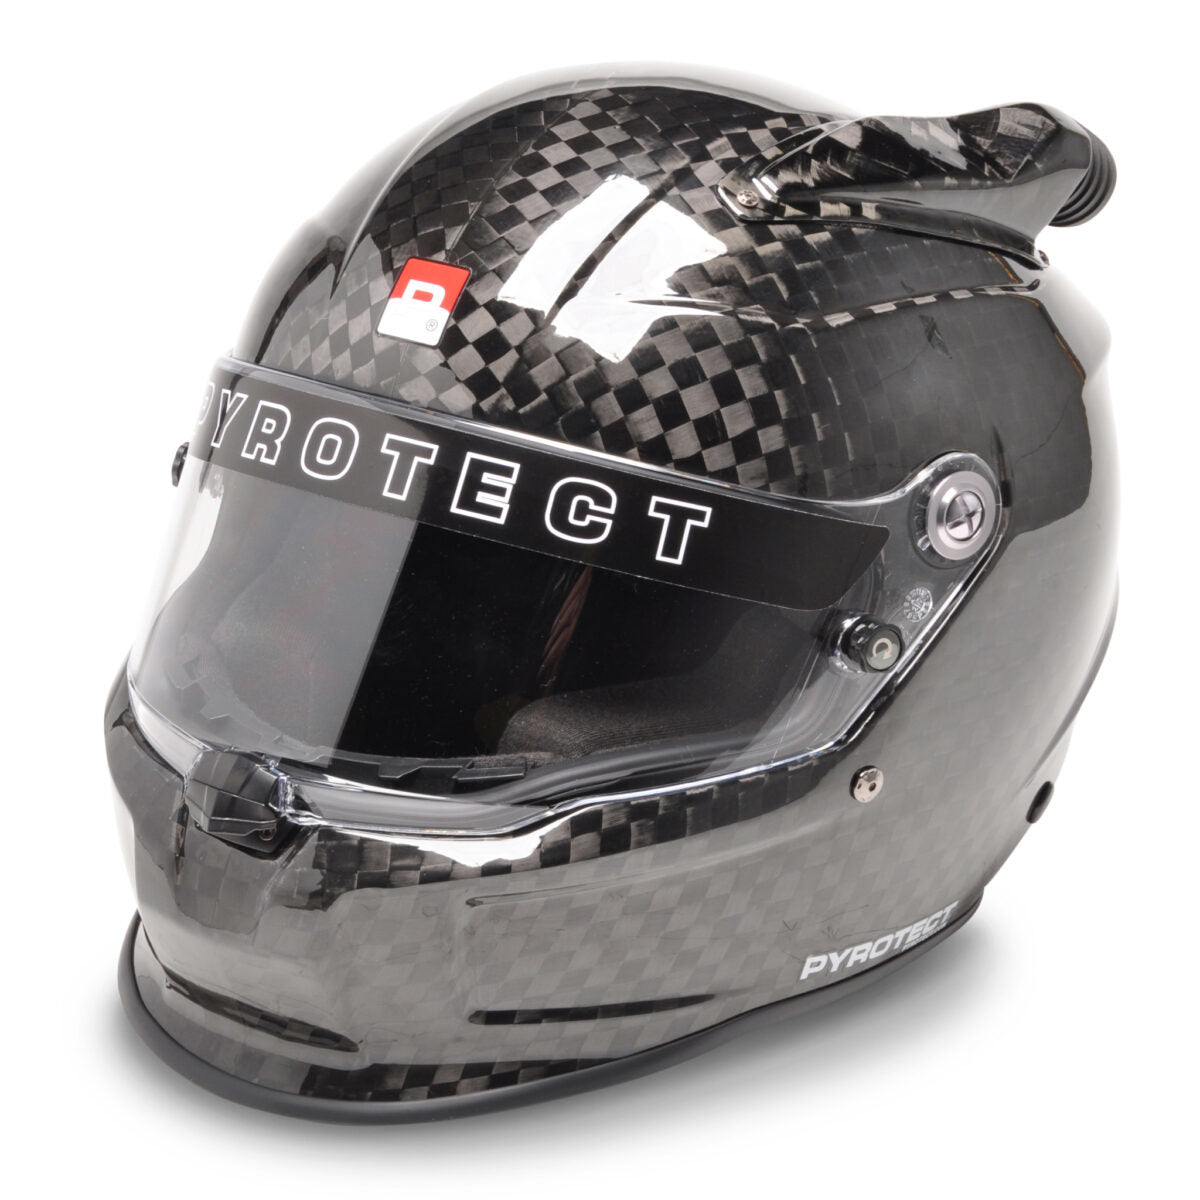 Pyrotect Helmet Pro Flat Carbon X-Large Mid-Air SA2020 Helmets and Accessories Helmets main image